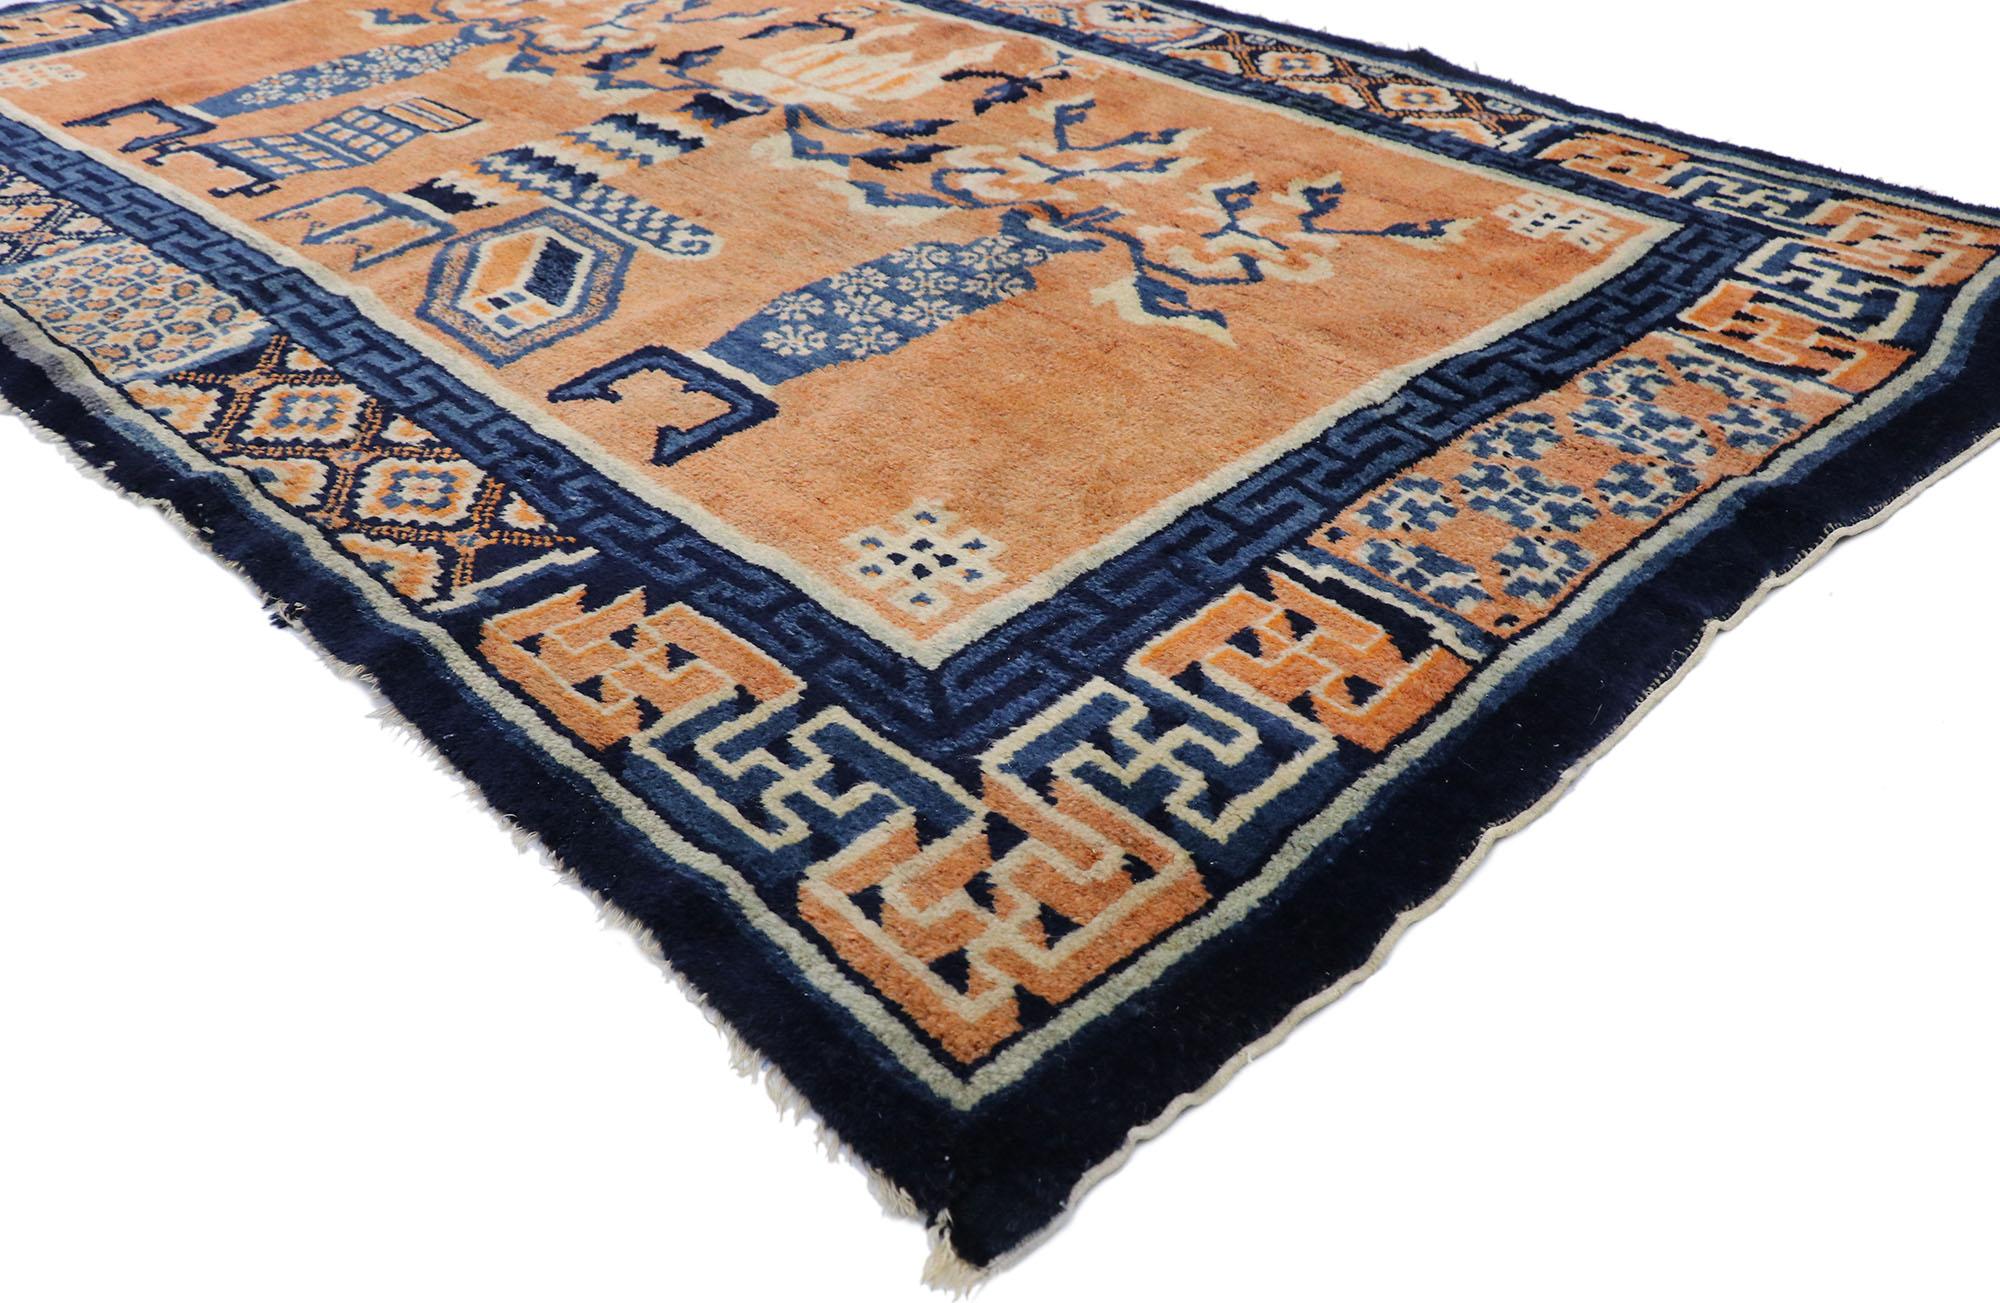 78027 vintage Chinese Baotou vase Pictorial rug with Chinese Chippendale style 04'03 x 06'08. This hand-knotted wool vintage Chinese Baotou pictorial rug features an abrashed burnt orange field showcasing different types of cloisonné vases sprouting